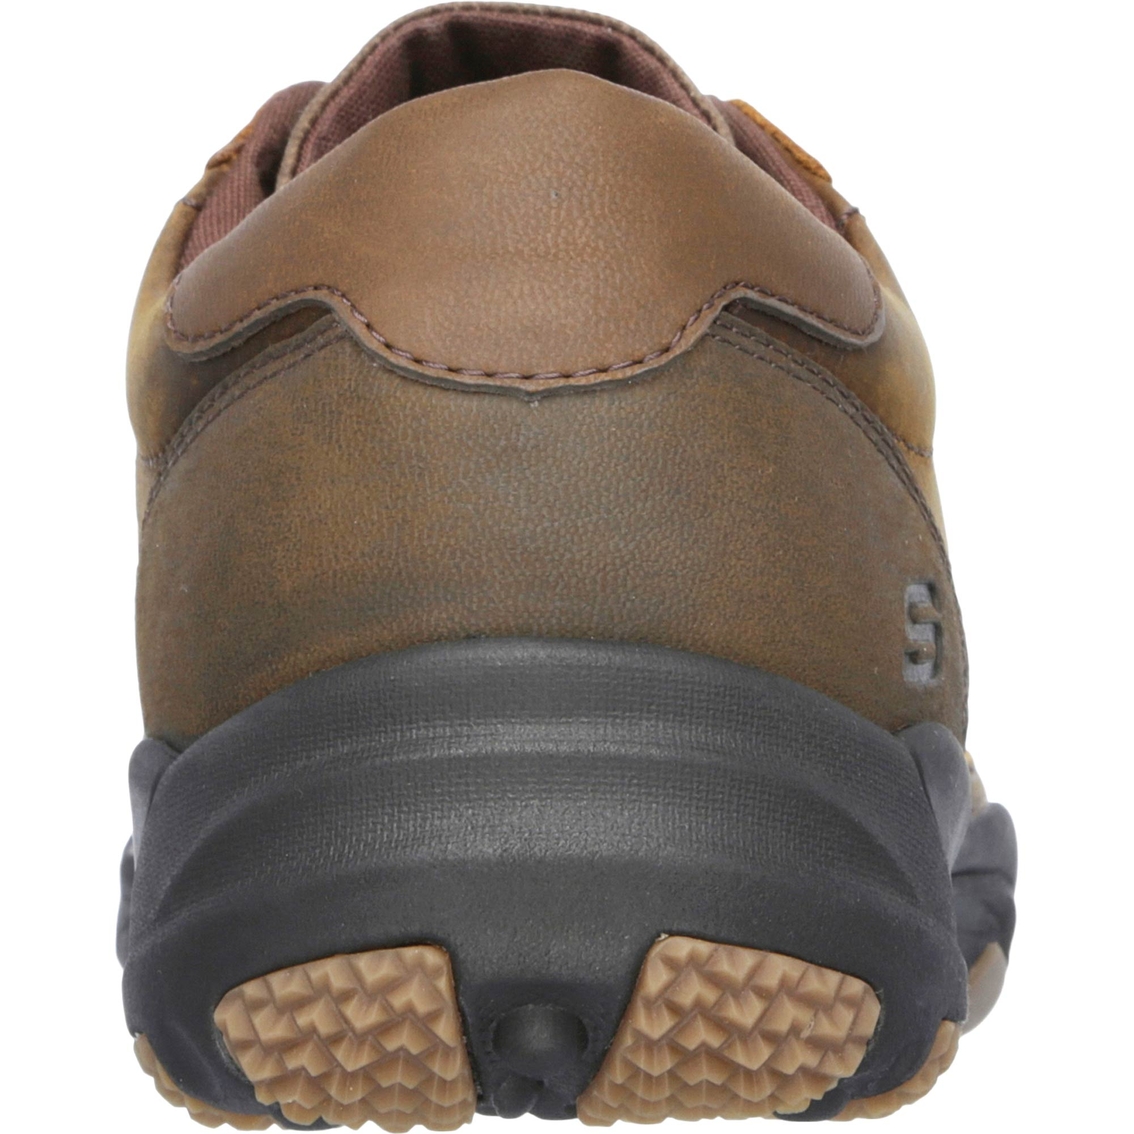 Skechers Larson Nerick Casual Lace Up Shoes - Image 3 of 4